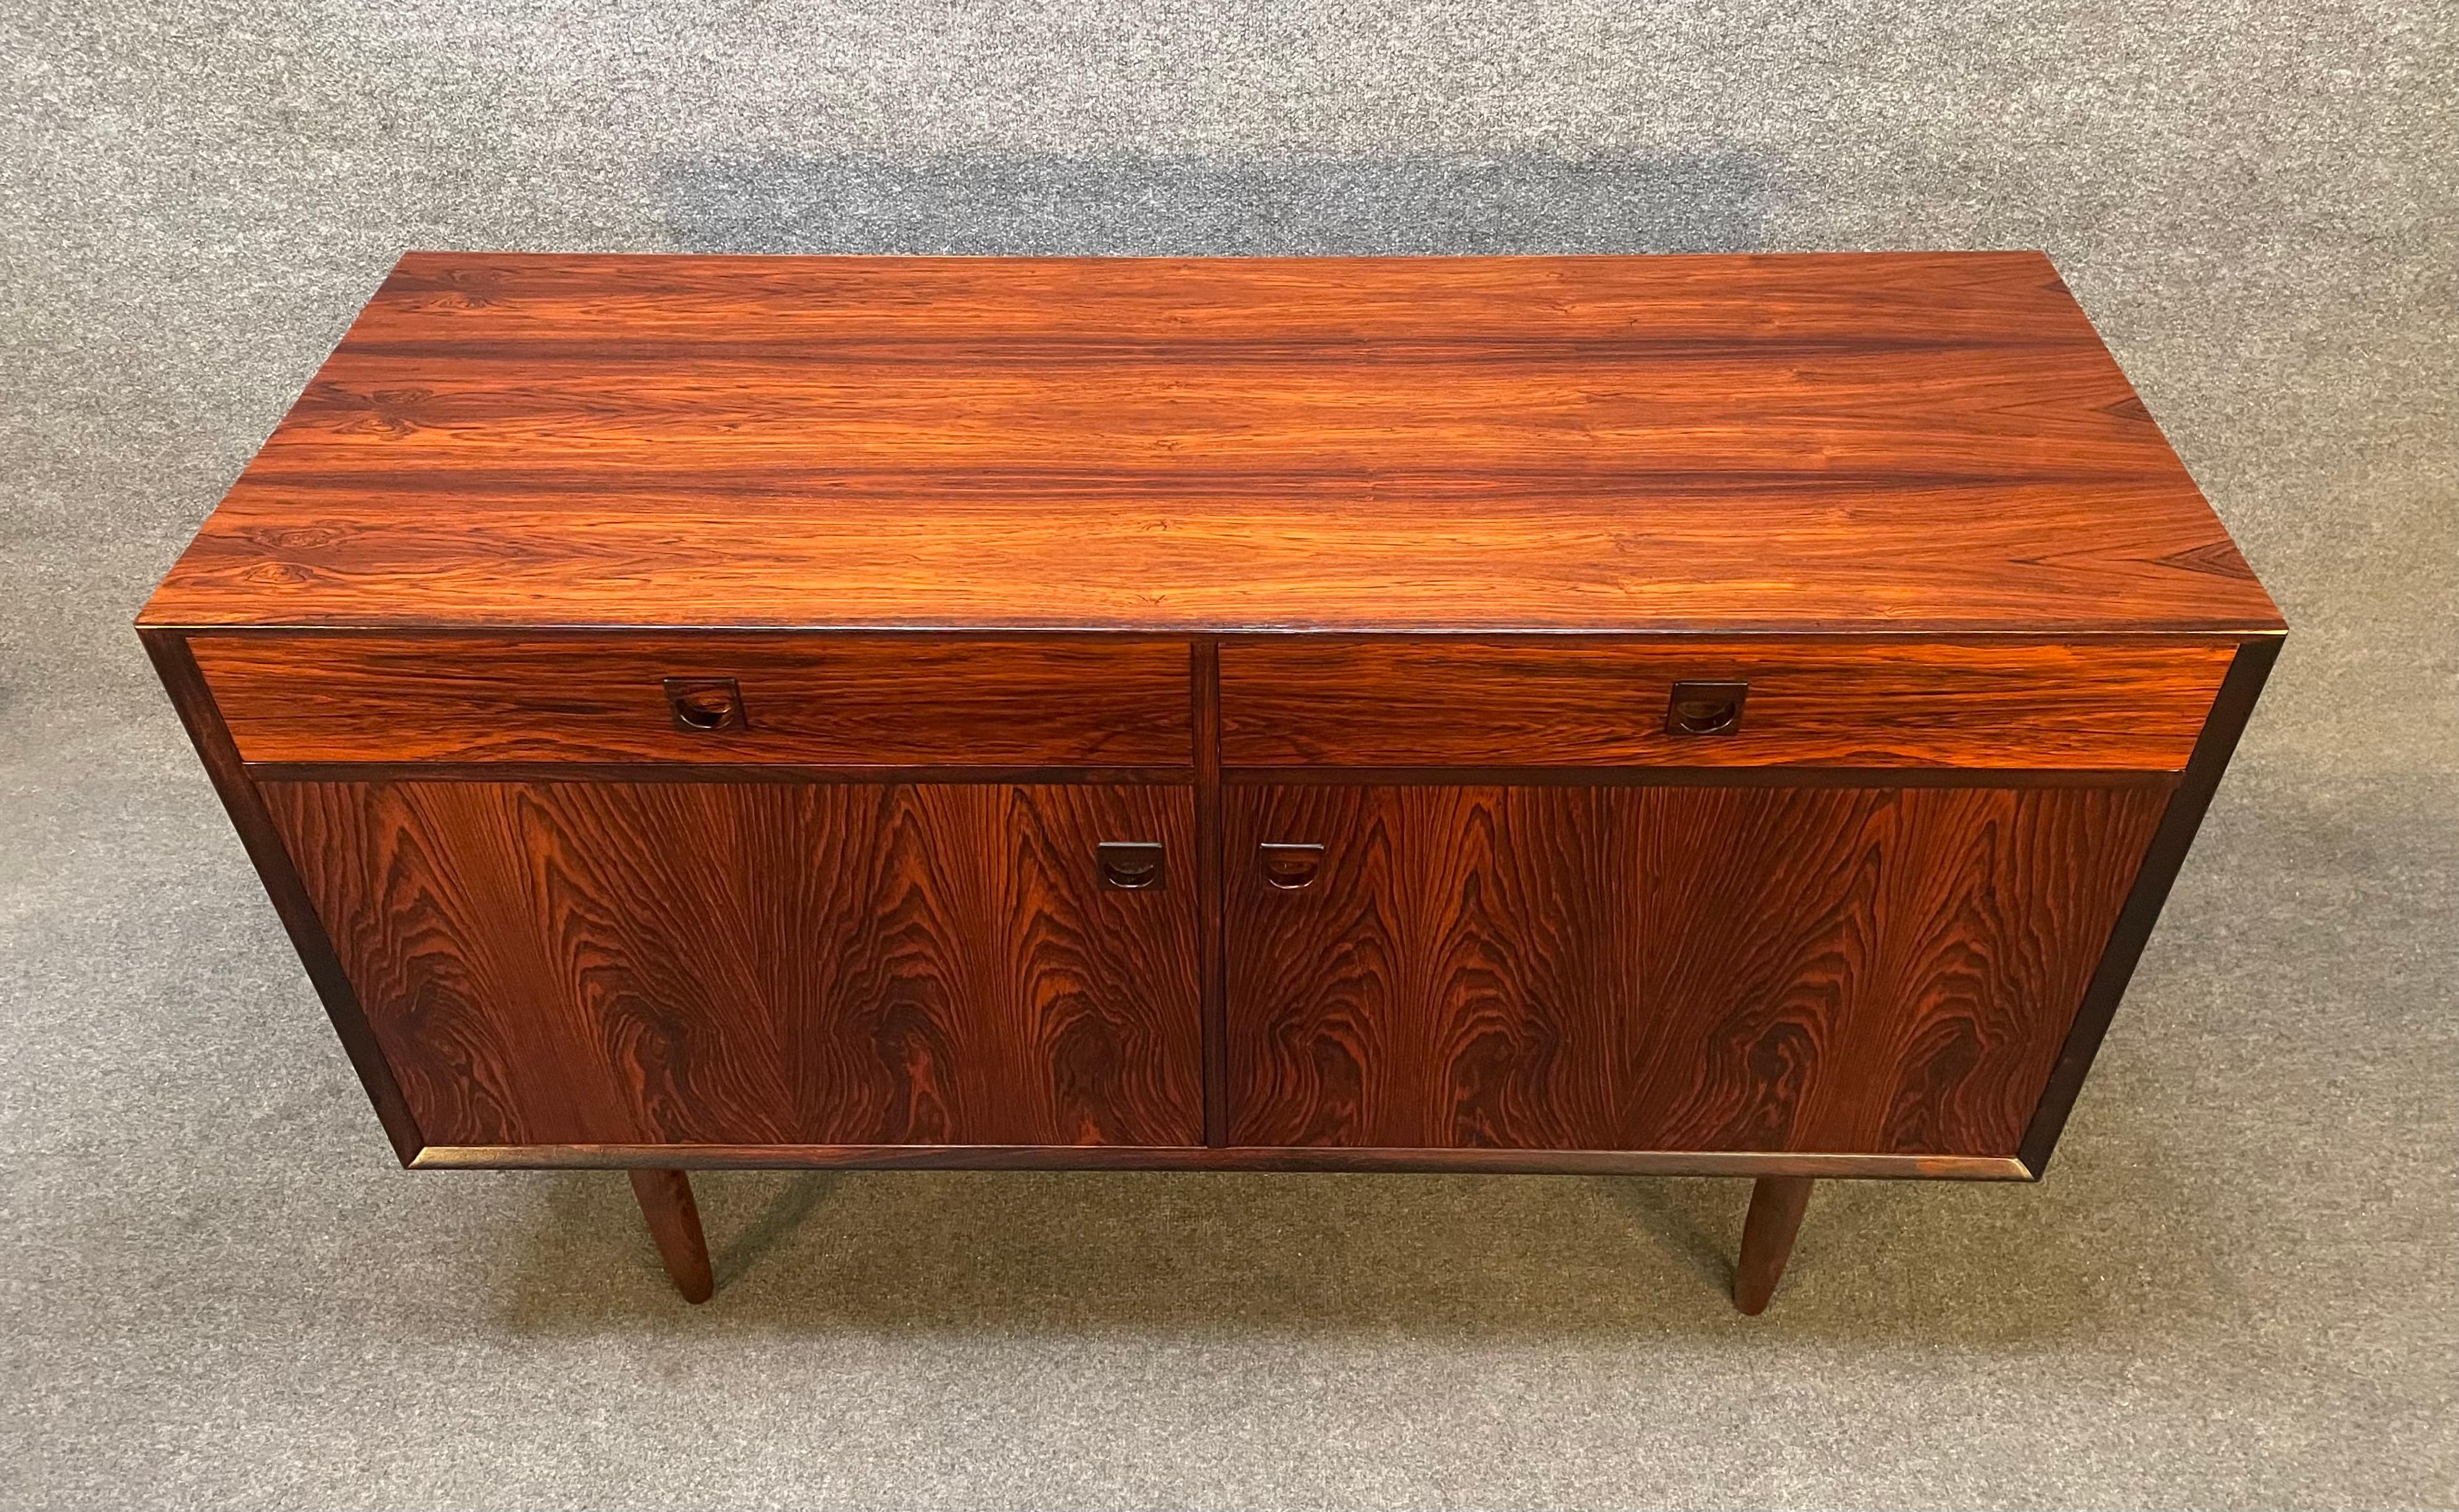 Here is a beautiful scandinavian modern rosewood compact sideboard manufactured by Brouer Mobelfabrik in Denmark in the 1960's.
This exquisite piece, recently imported from Europe to California before its refinishing, features a vibrant wood grain,